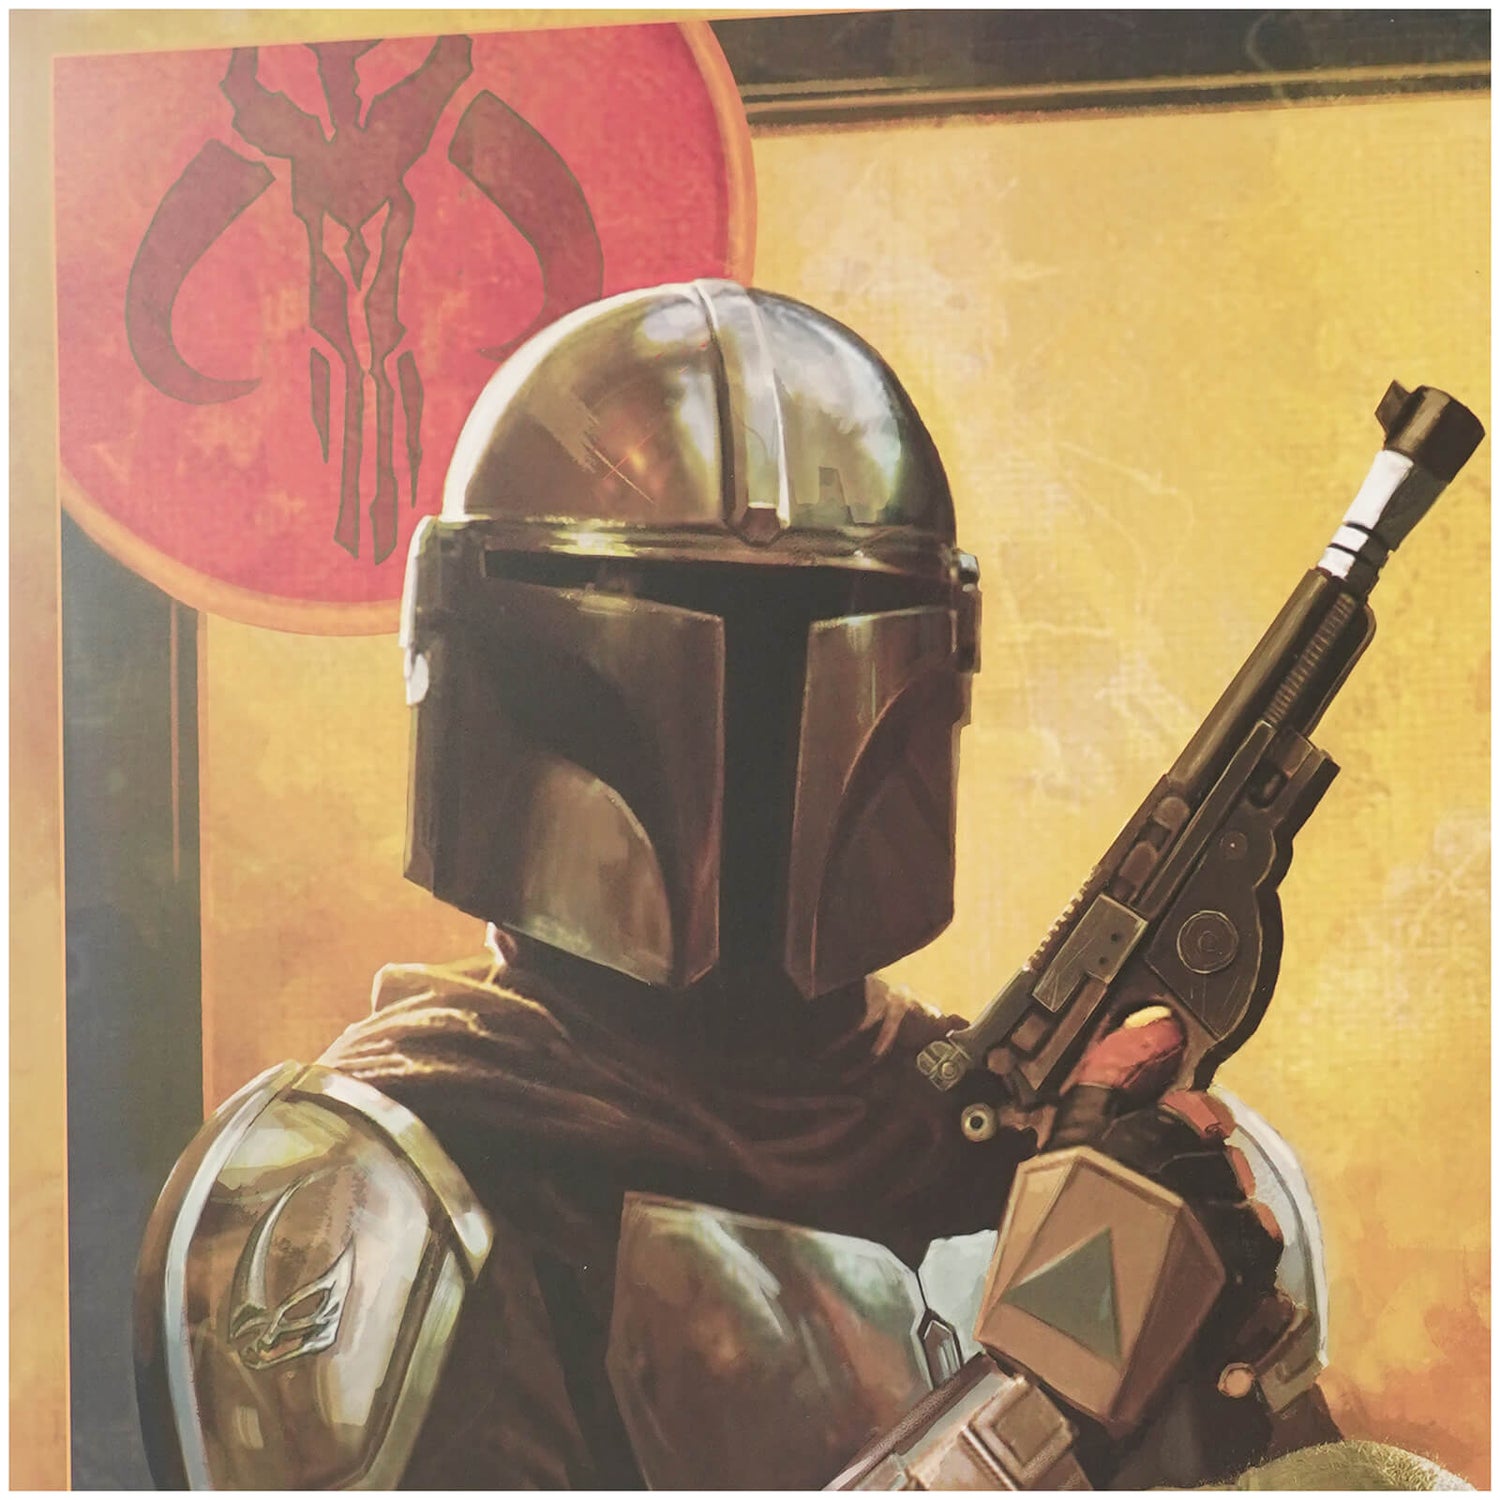 Star Wars The Mandalorian "Tribe of Two" Lithograph by Kayla Woodside